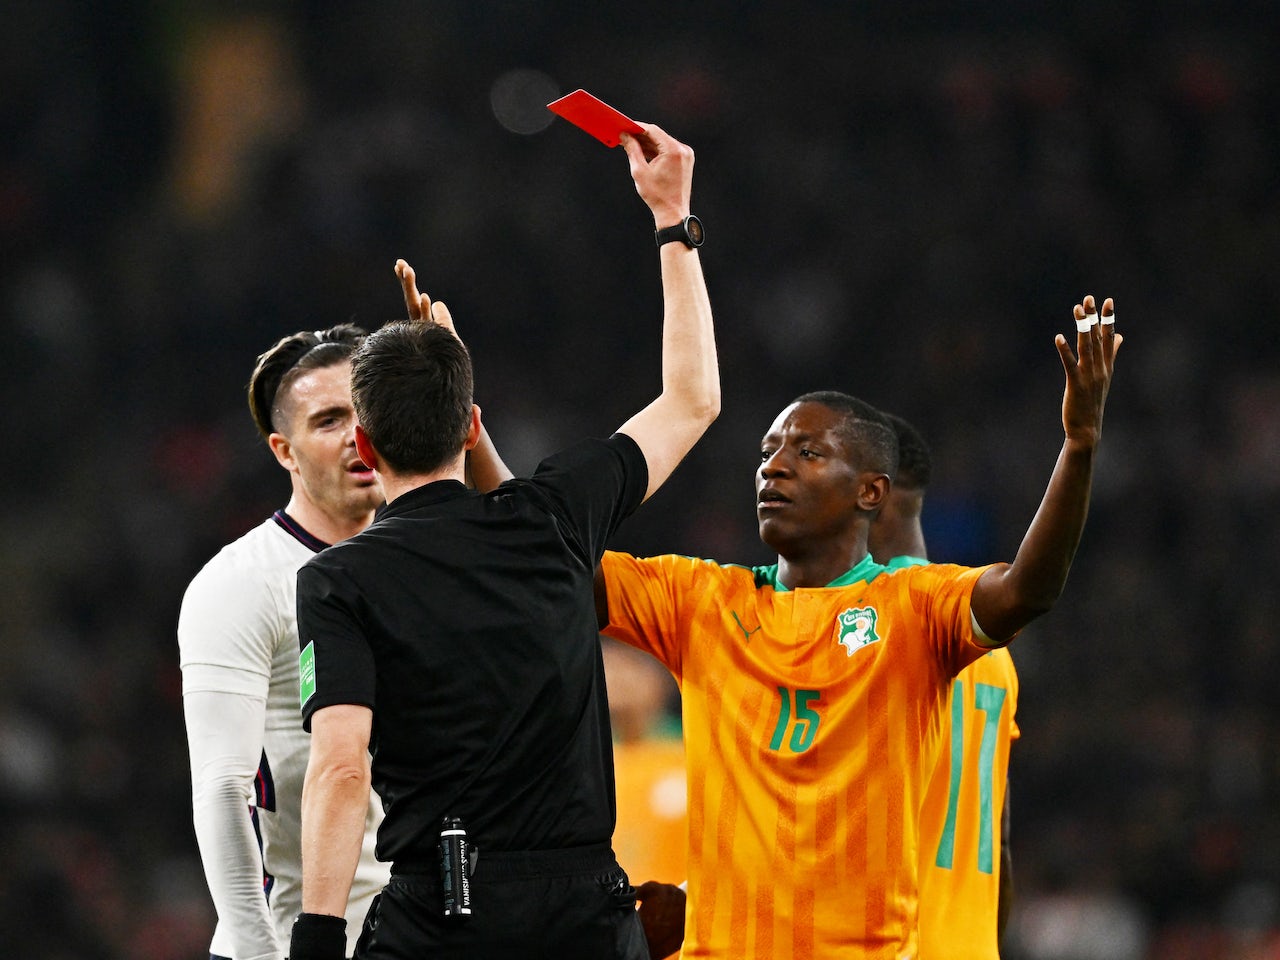 Coast's Serge Aurier is shown a red card by referee Erik Lambrechts as Ivory Coast's Max Gradel reacts March 29, - Mole